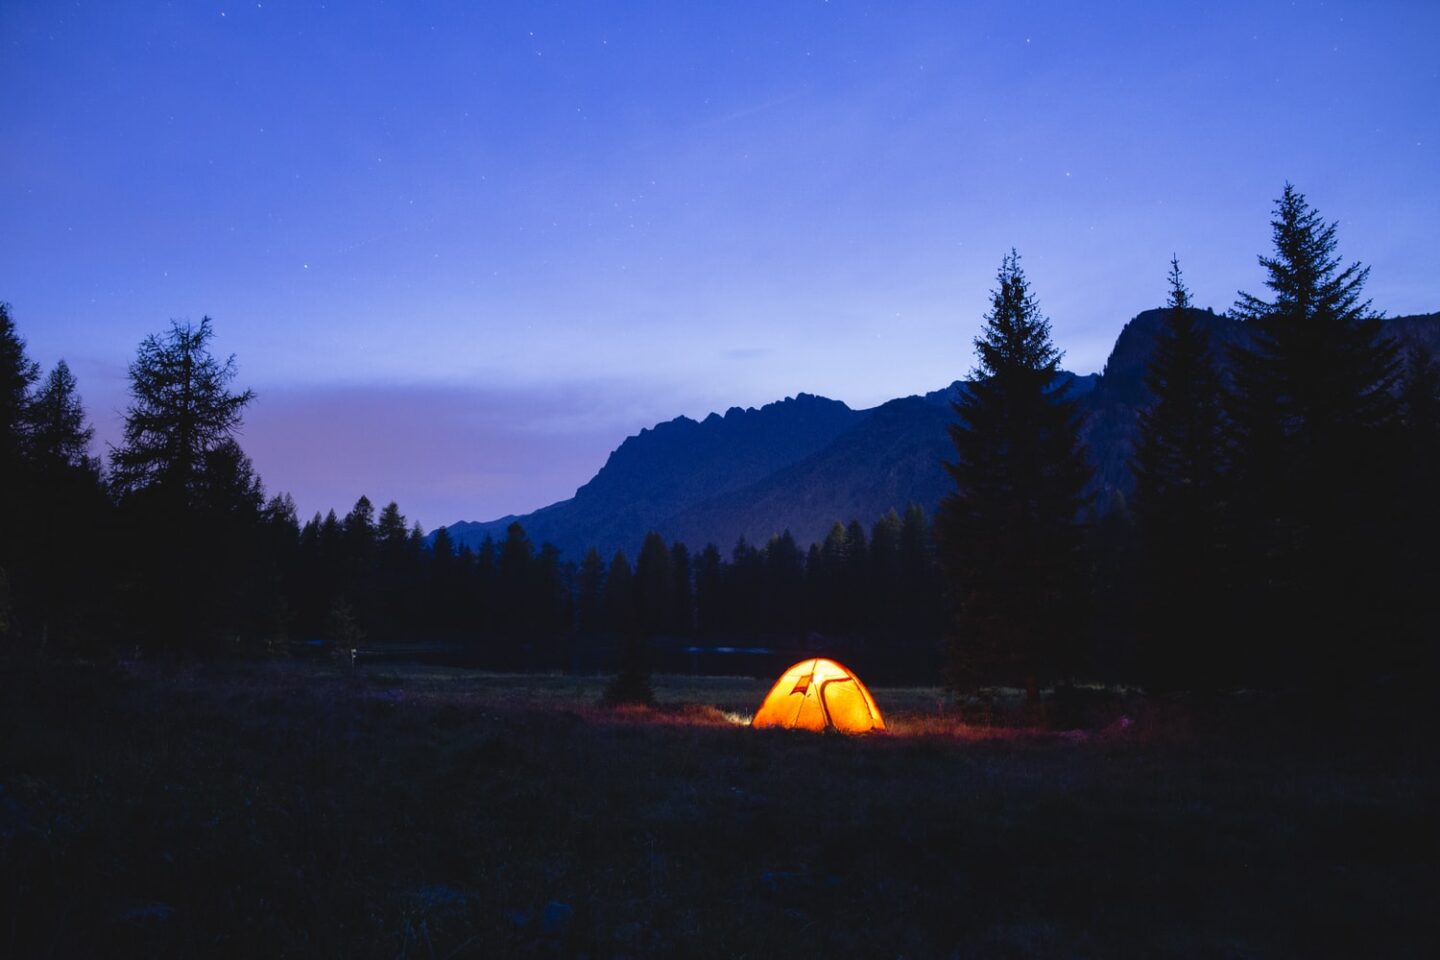 Tent glowing against the mountains during wild camping at night.